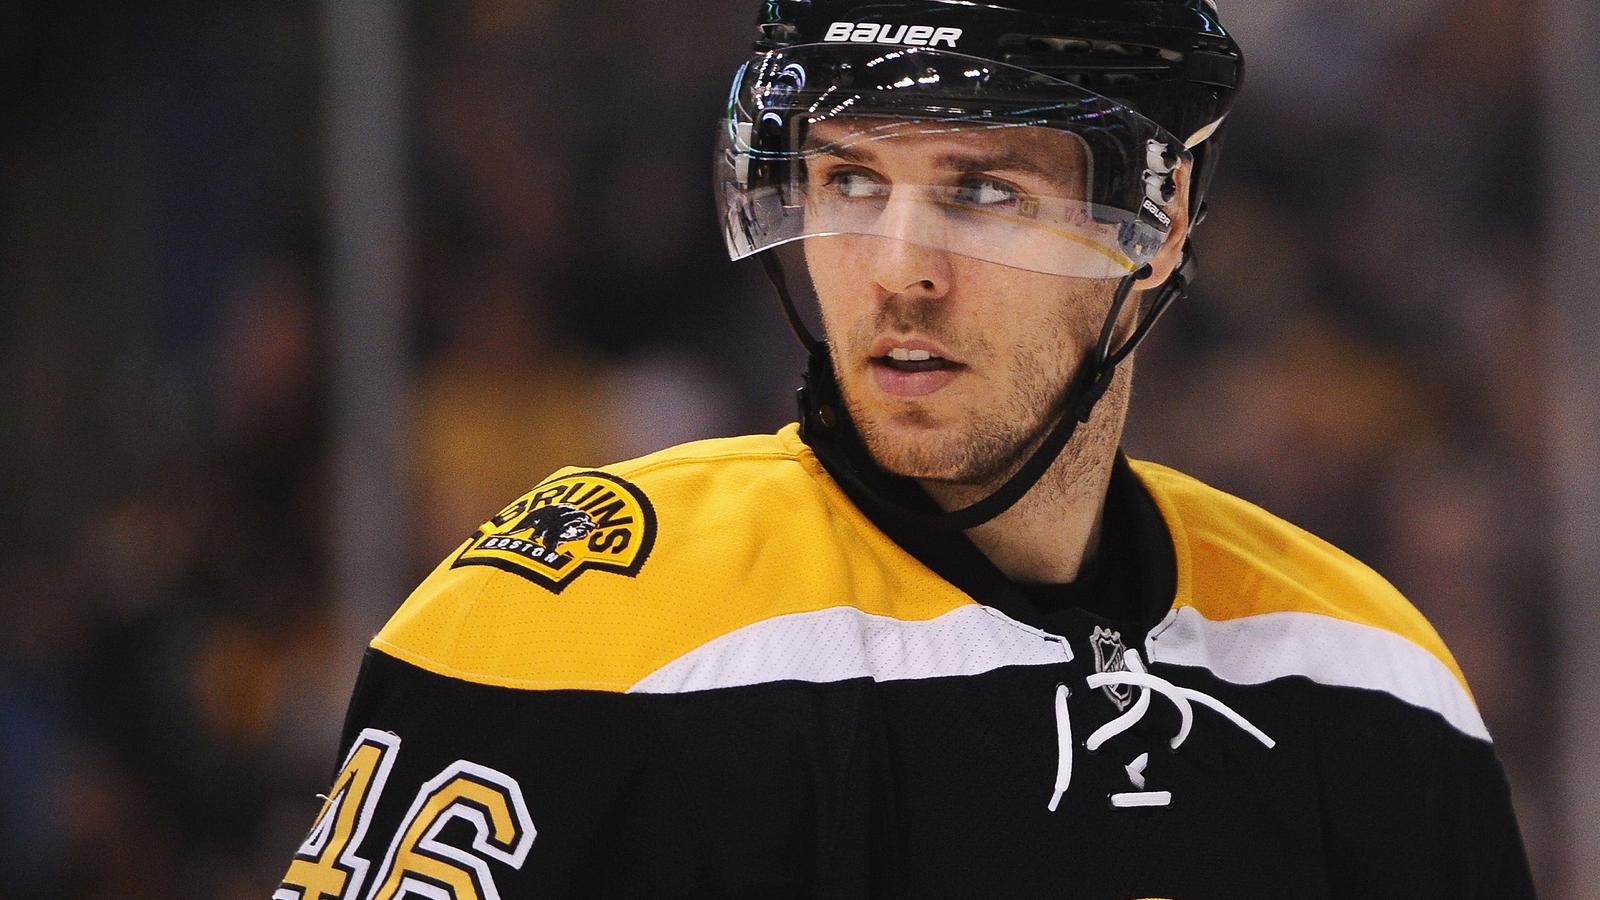 David Krejci leaves the Bruins and the NHL entirely 